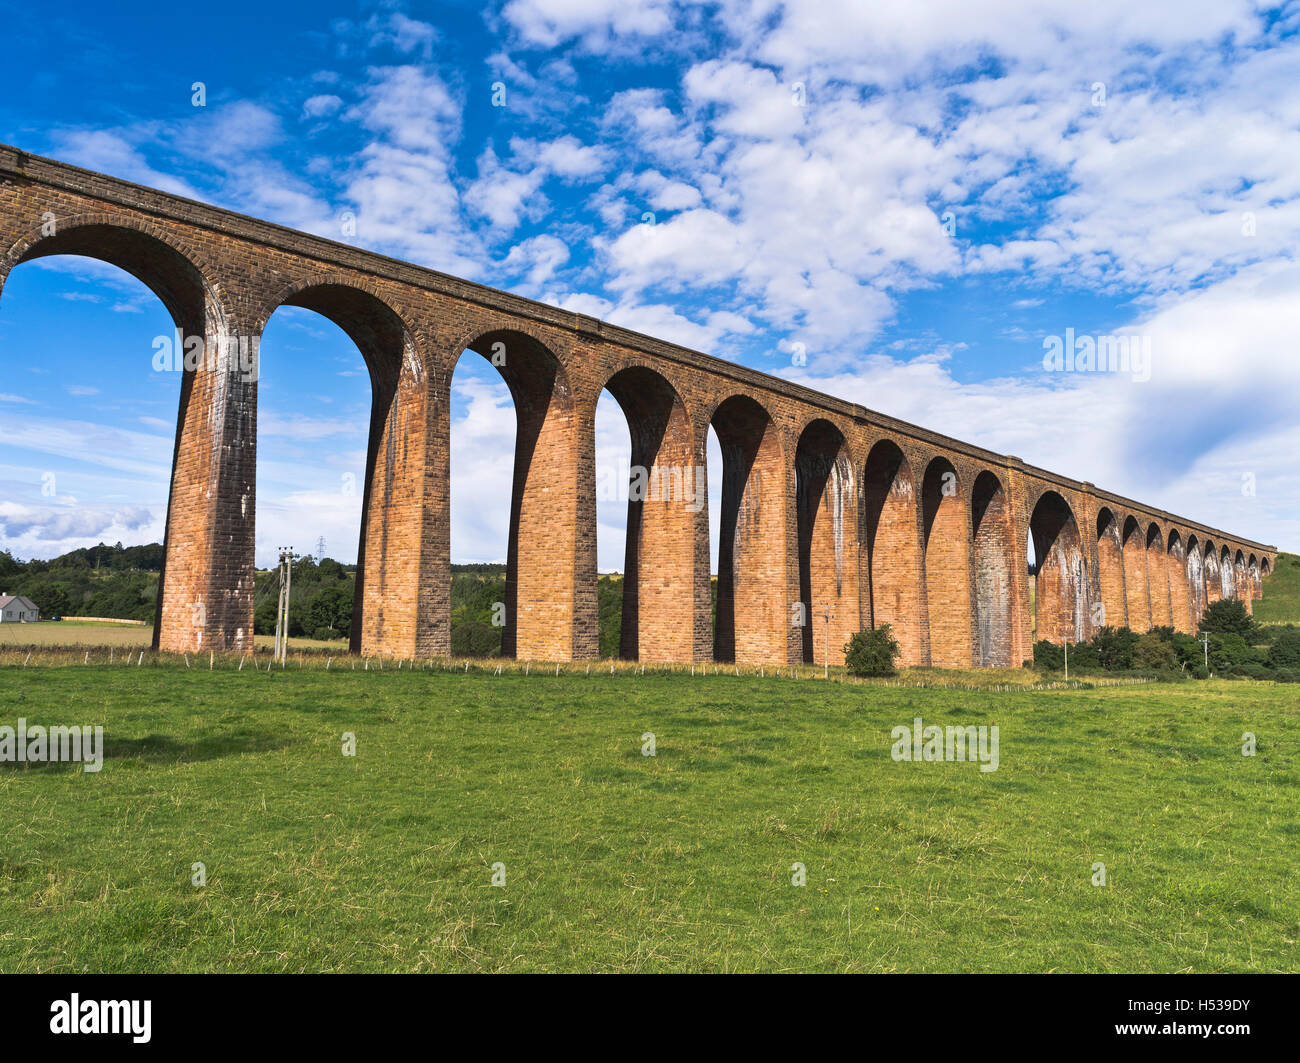 dh Nairn Railway Viaduct NAIRN VALLEY INVERNESS SHIRE Culloden Moor Viaduct spanning the River Nairn scotland uk viaducts Stock Photo